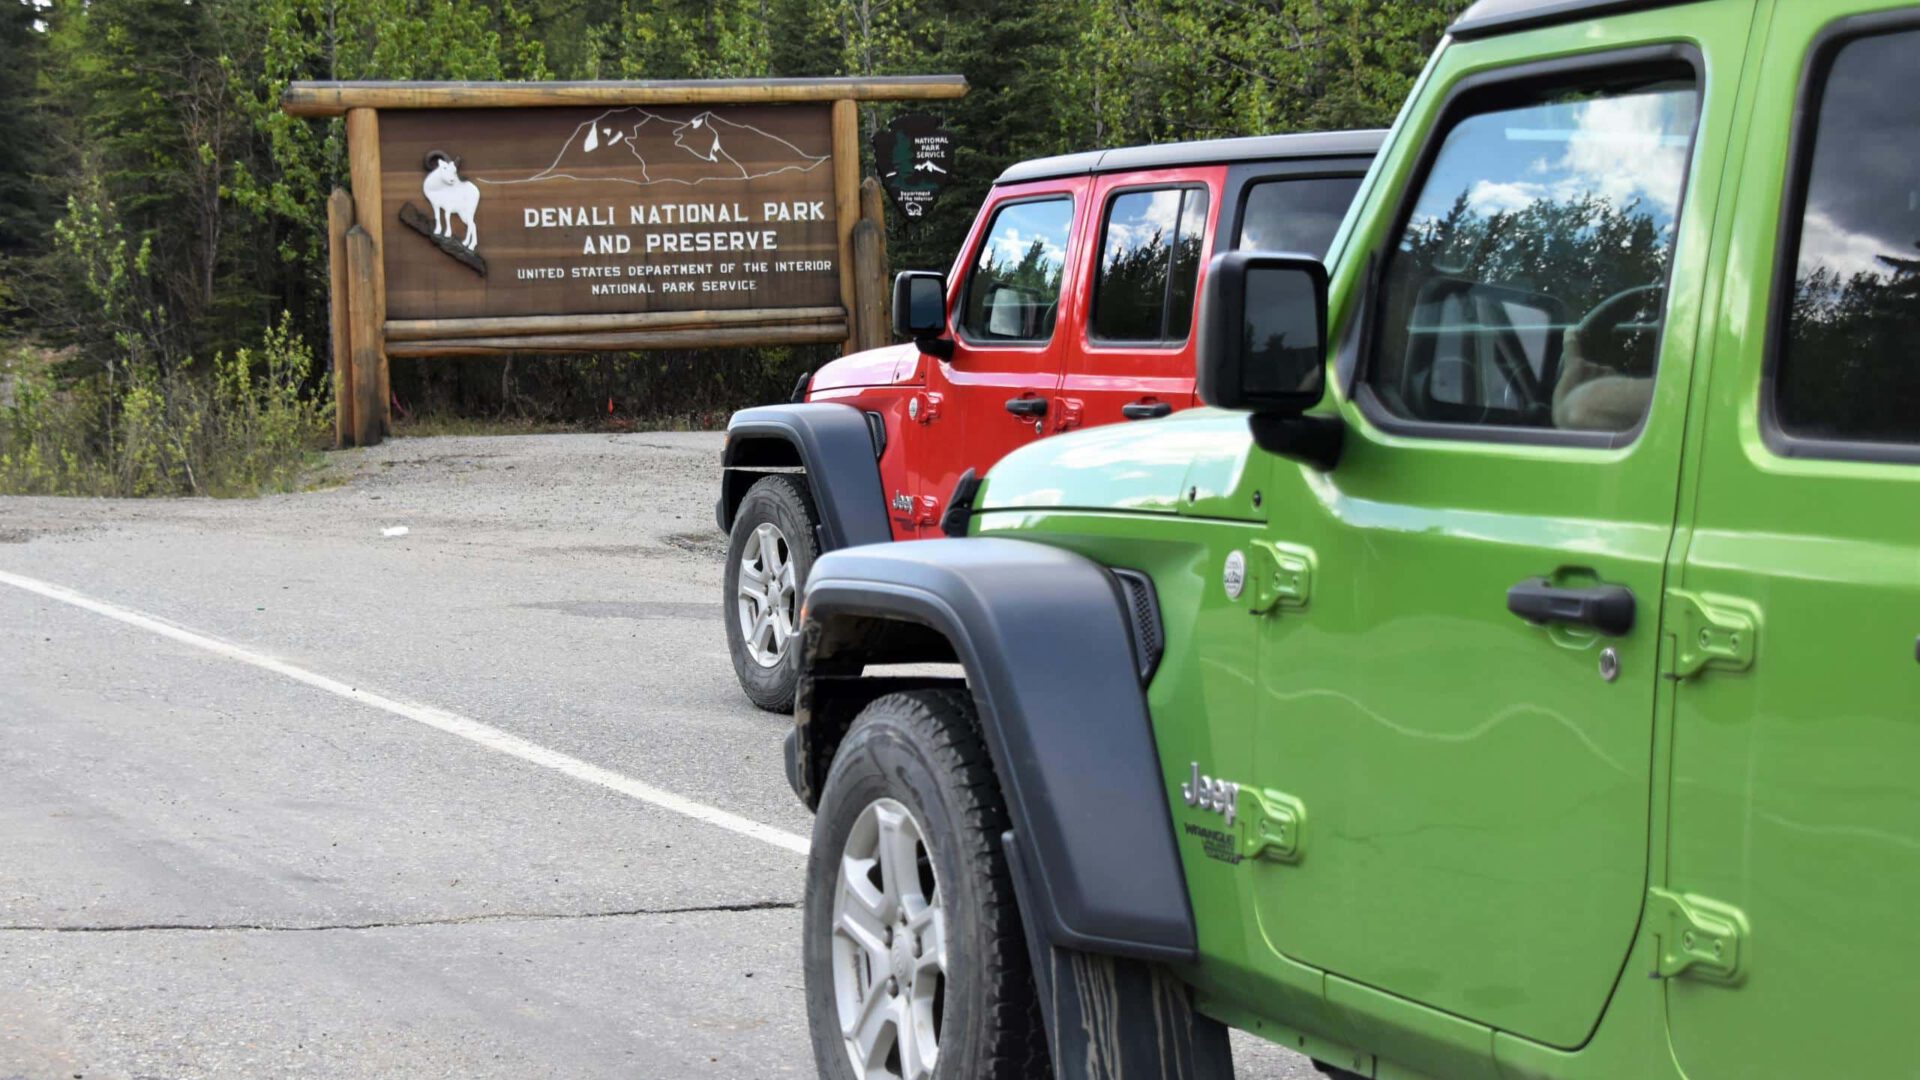 Two Jeeps are parked near the welcome sign near the entrance of Denali National Park.